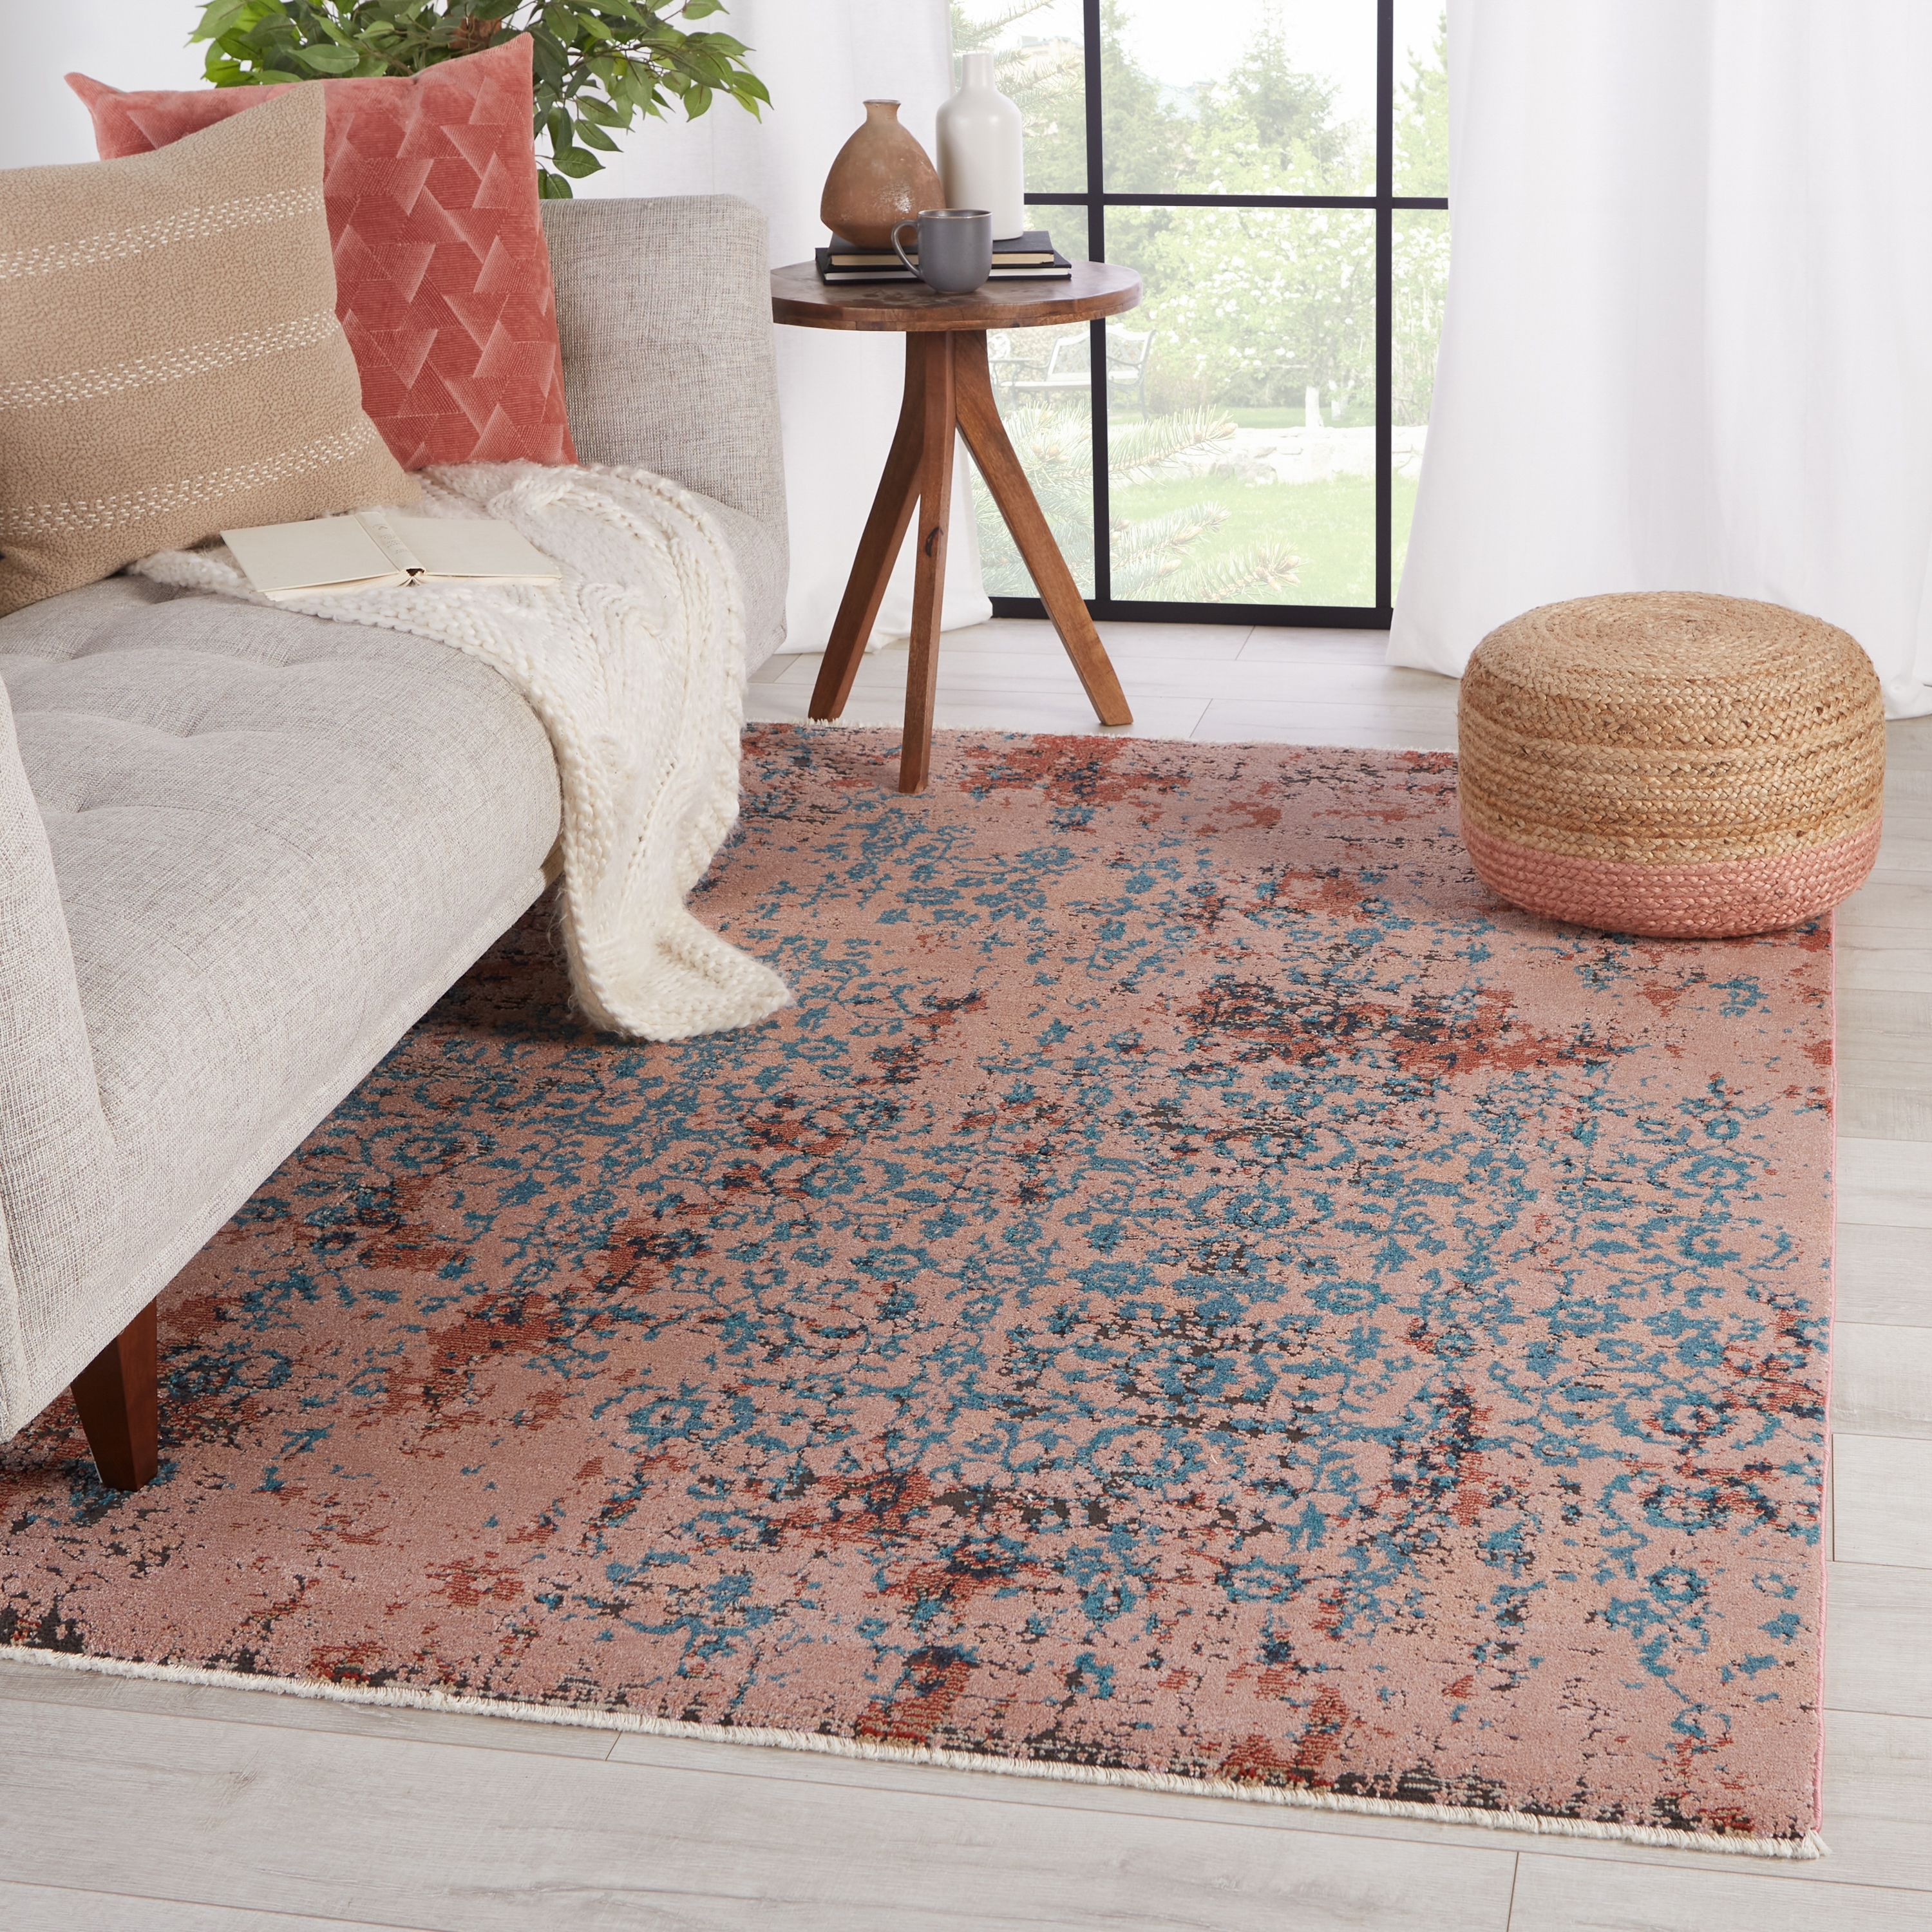 Vibe by Zea Trellis Pink/ Teal Area Rug (5'X7'6") - Image 4